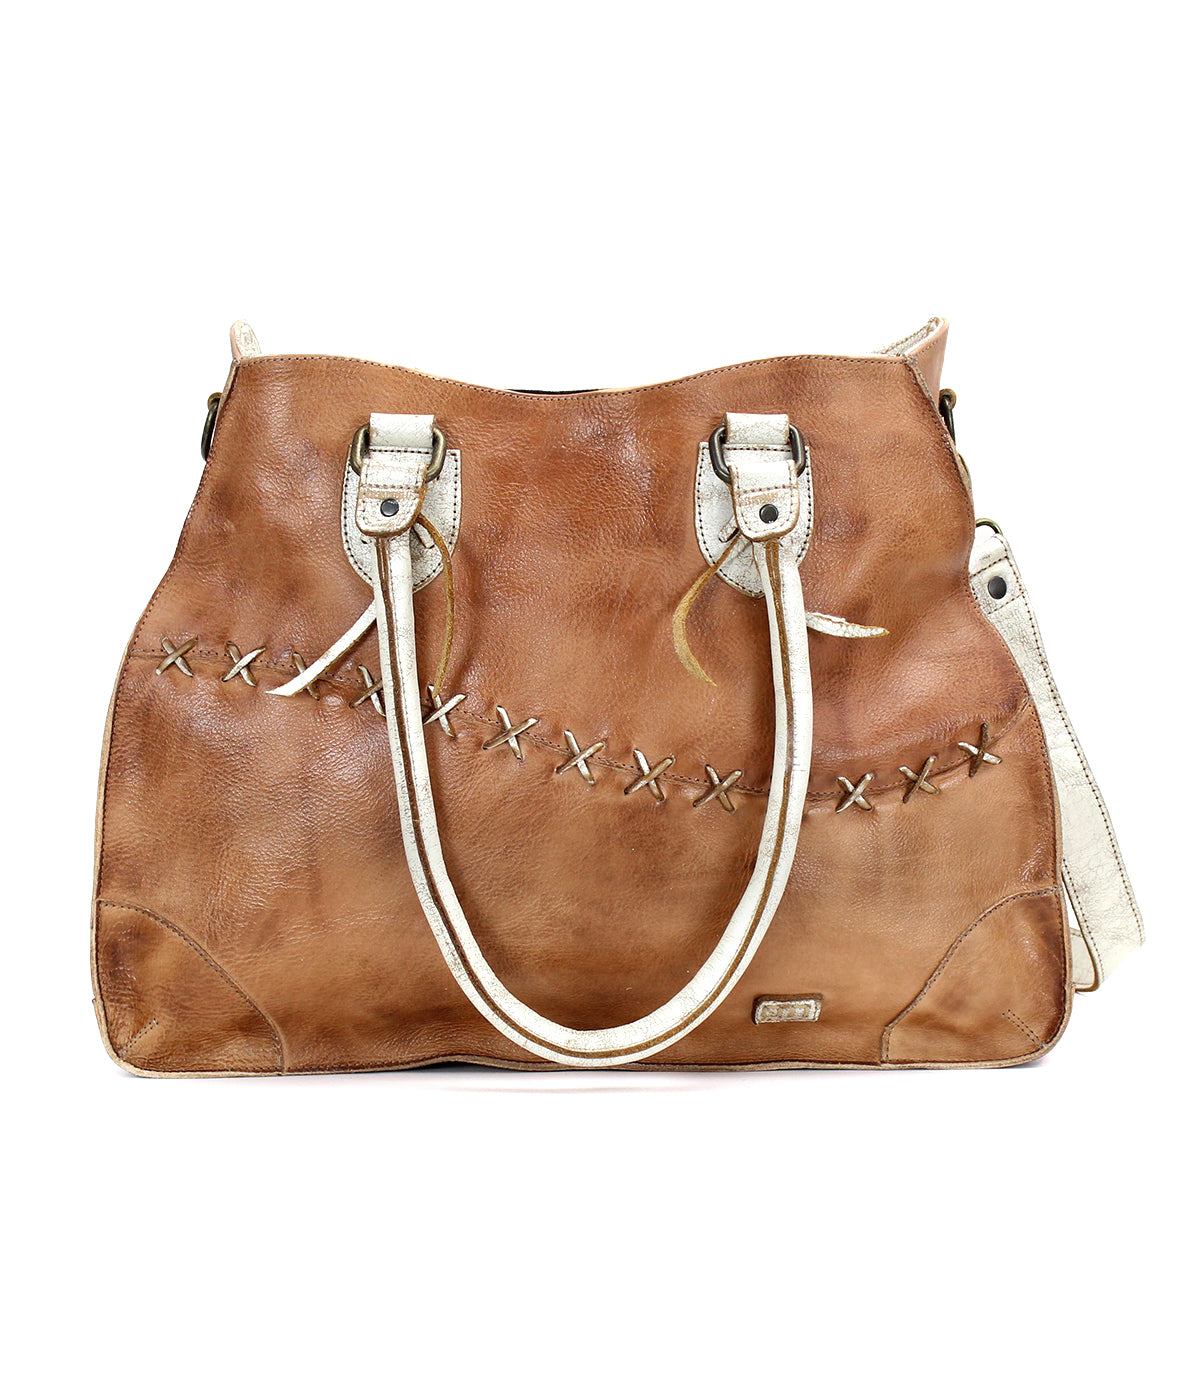 A Bruna leather handbag by Bed Stu with studs, handles, and a zipper.